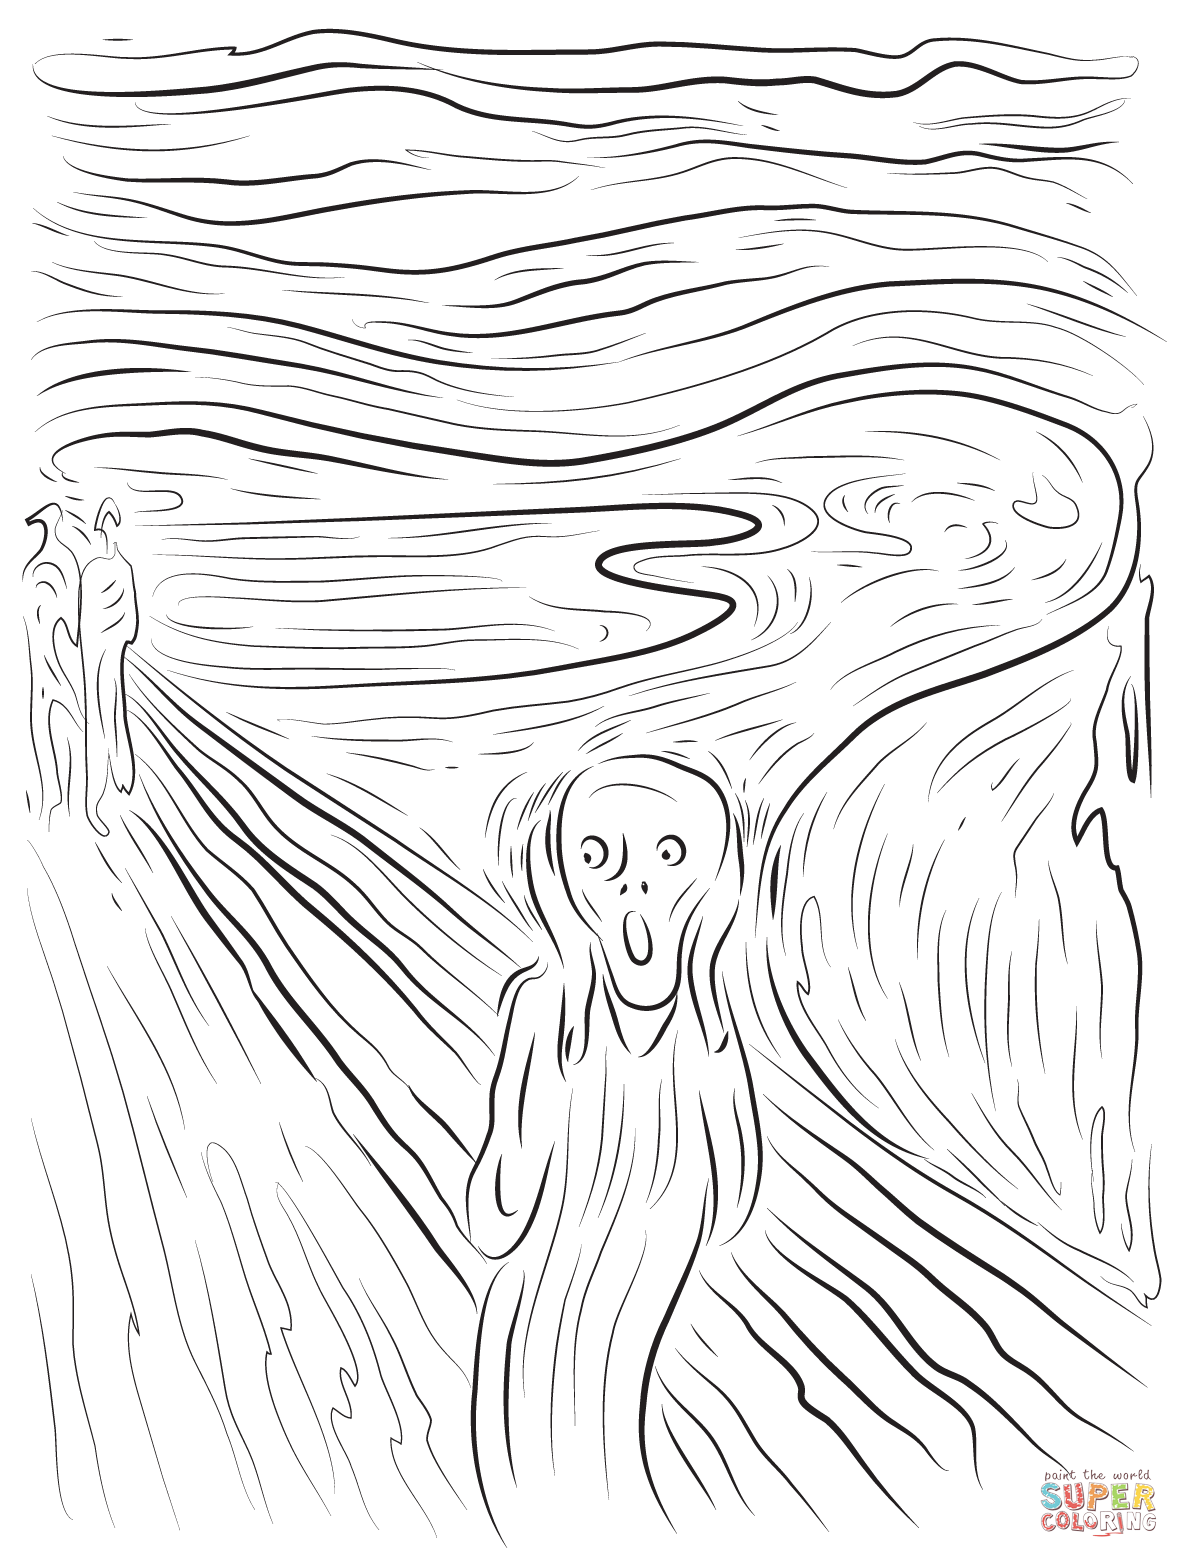 The Scream by Edvard Munch coloring page | Free Printable Coloring Pages |  Scream art, Edvard munch, Screaming drawing